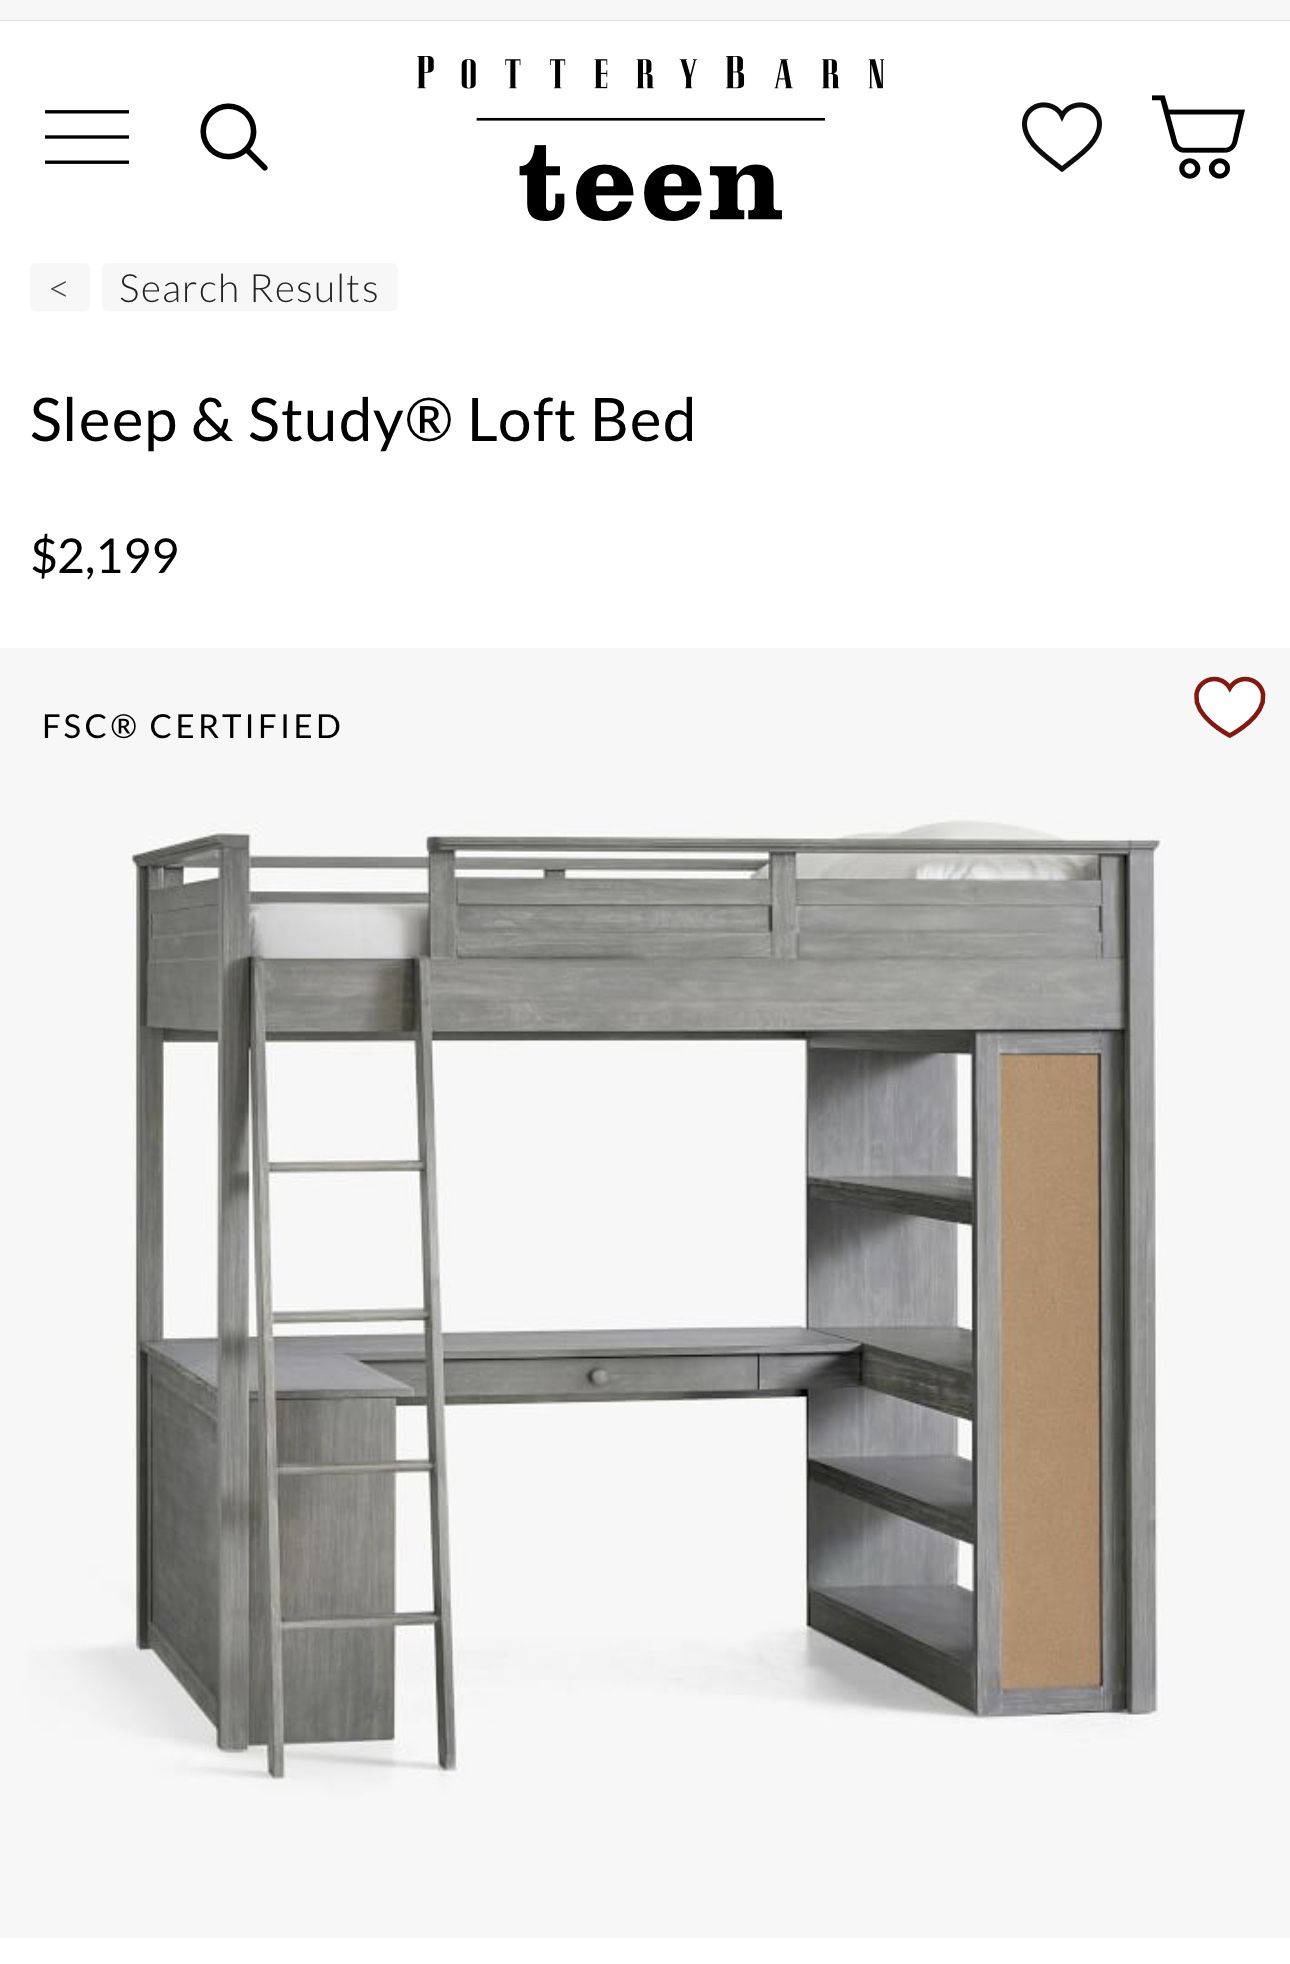 Loft Bed With Desk And Storage Shelves 